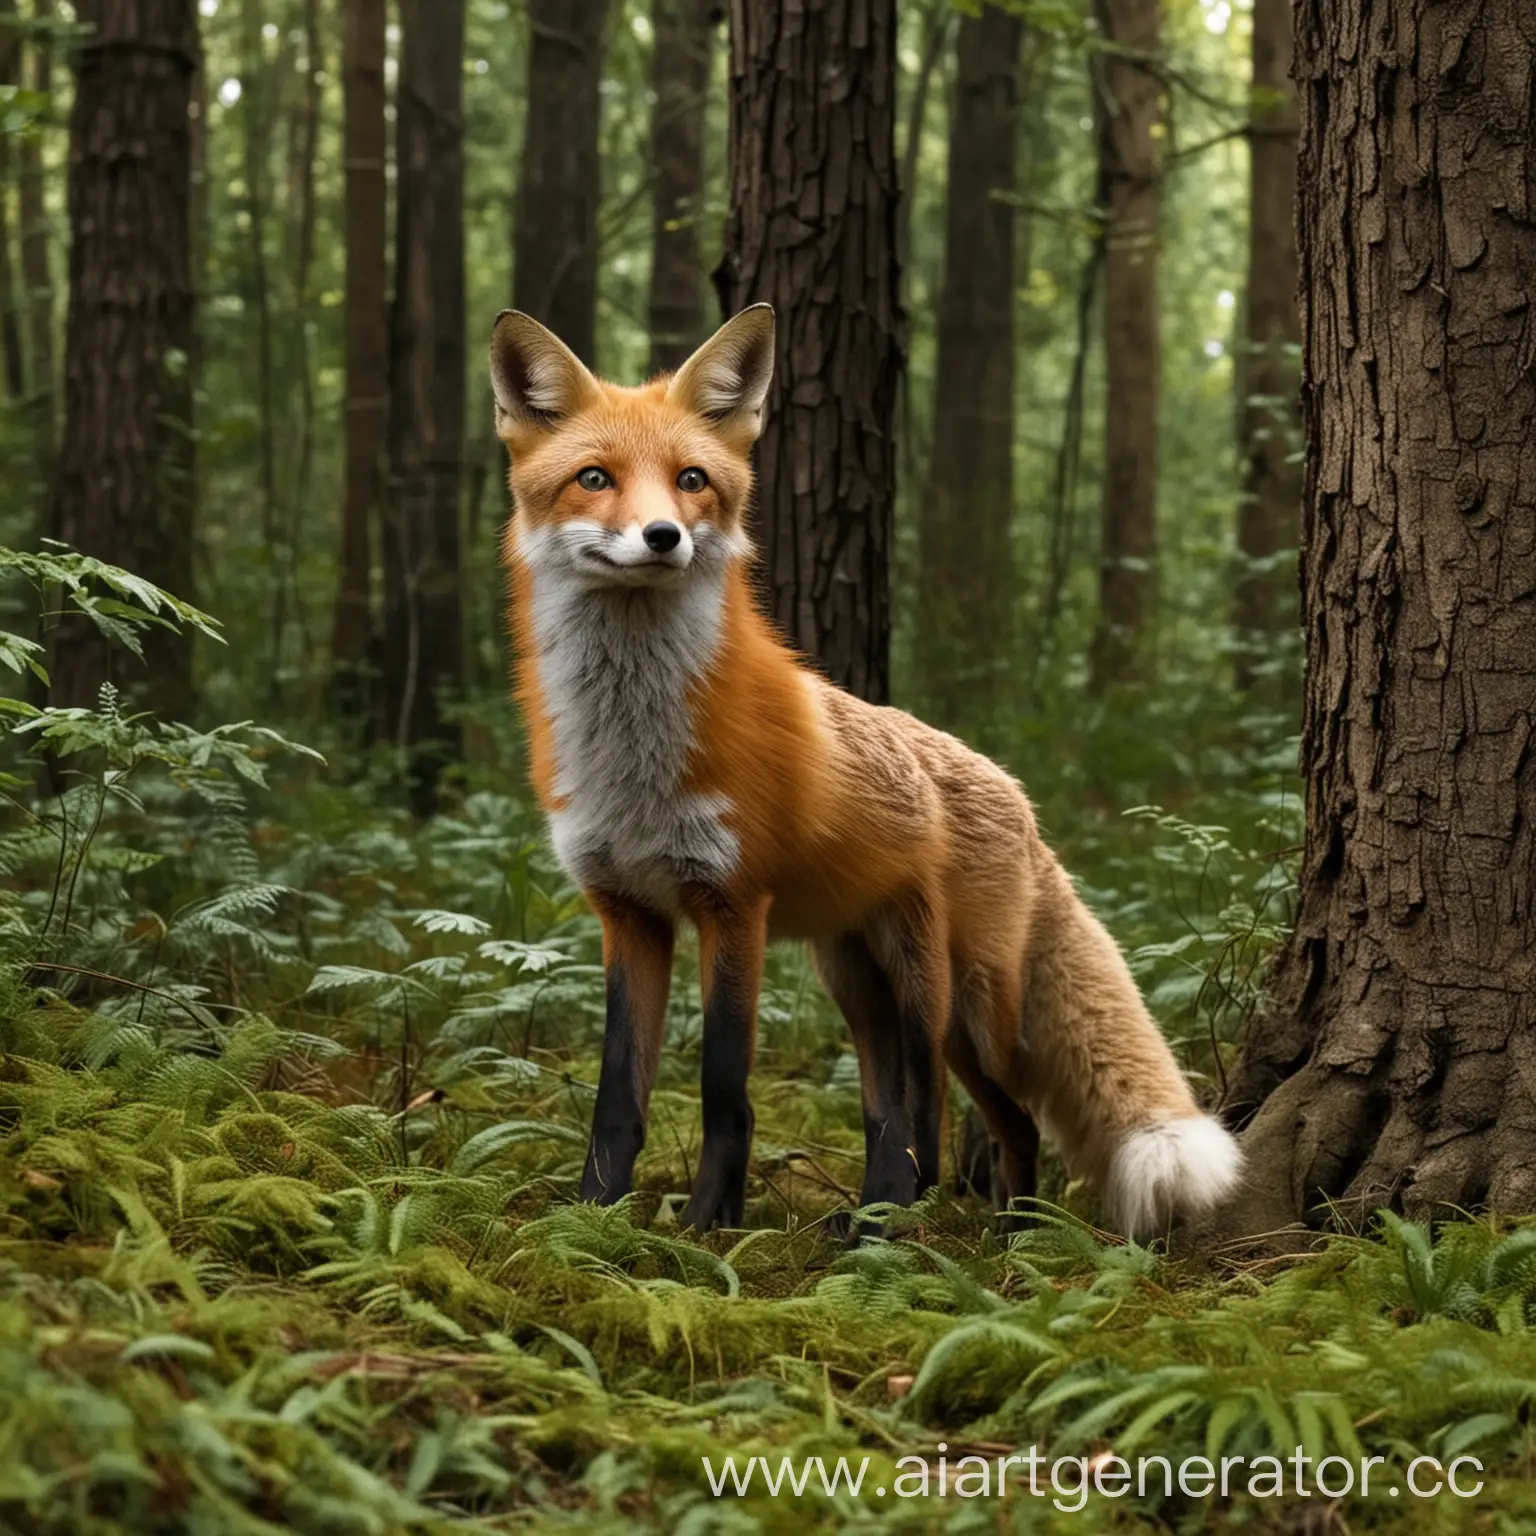 Once upon a time, in a dense forest, there lived a clever fox named Felix.